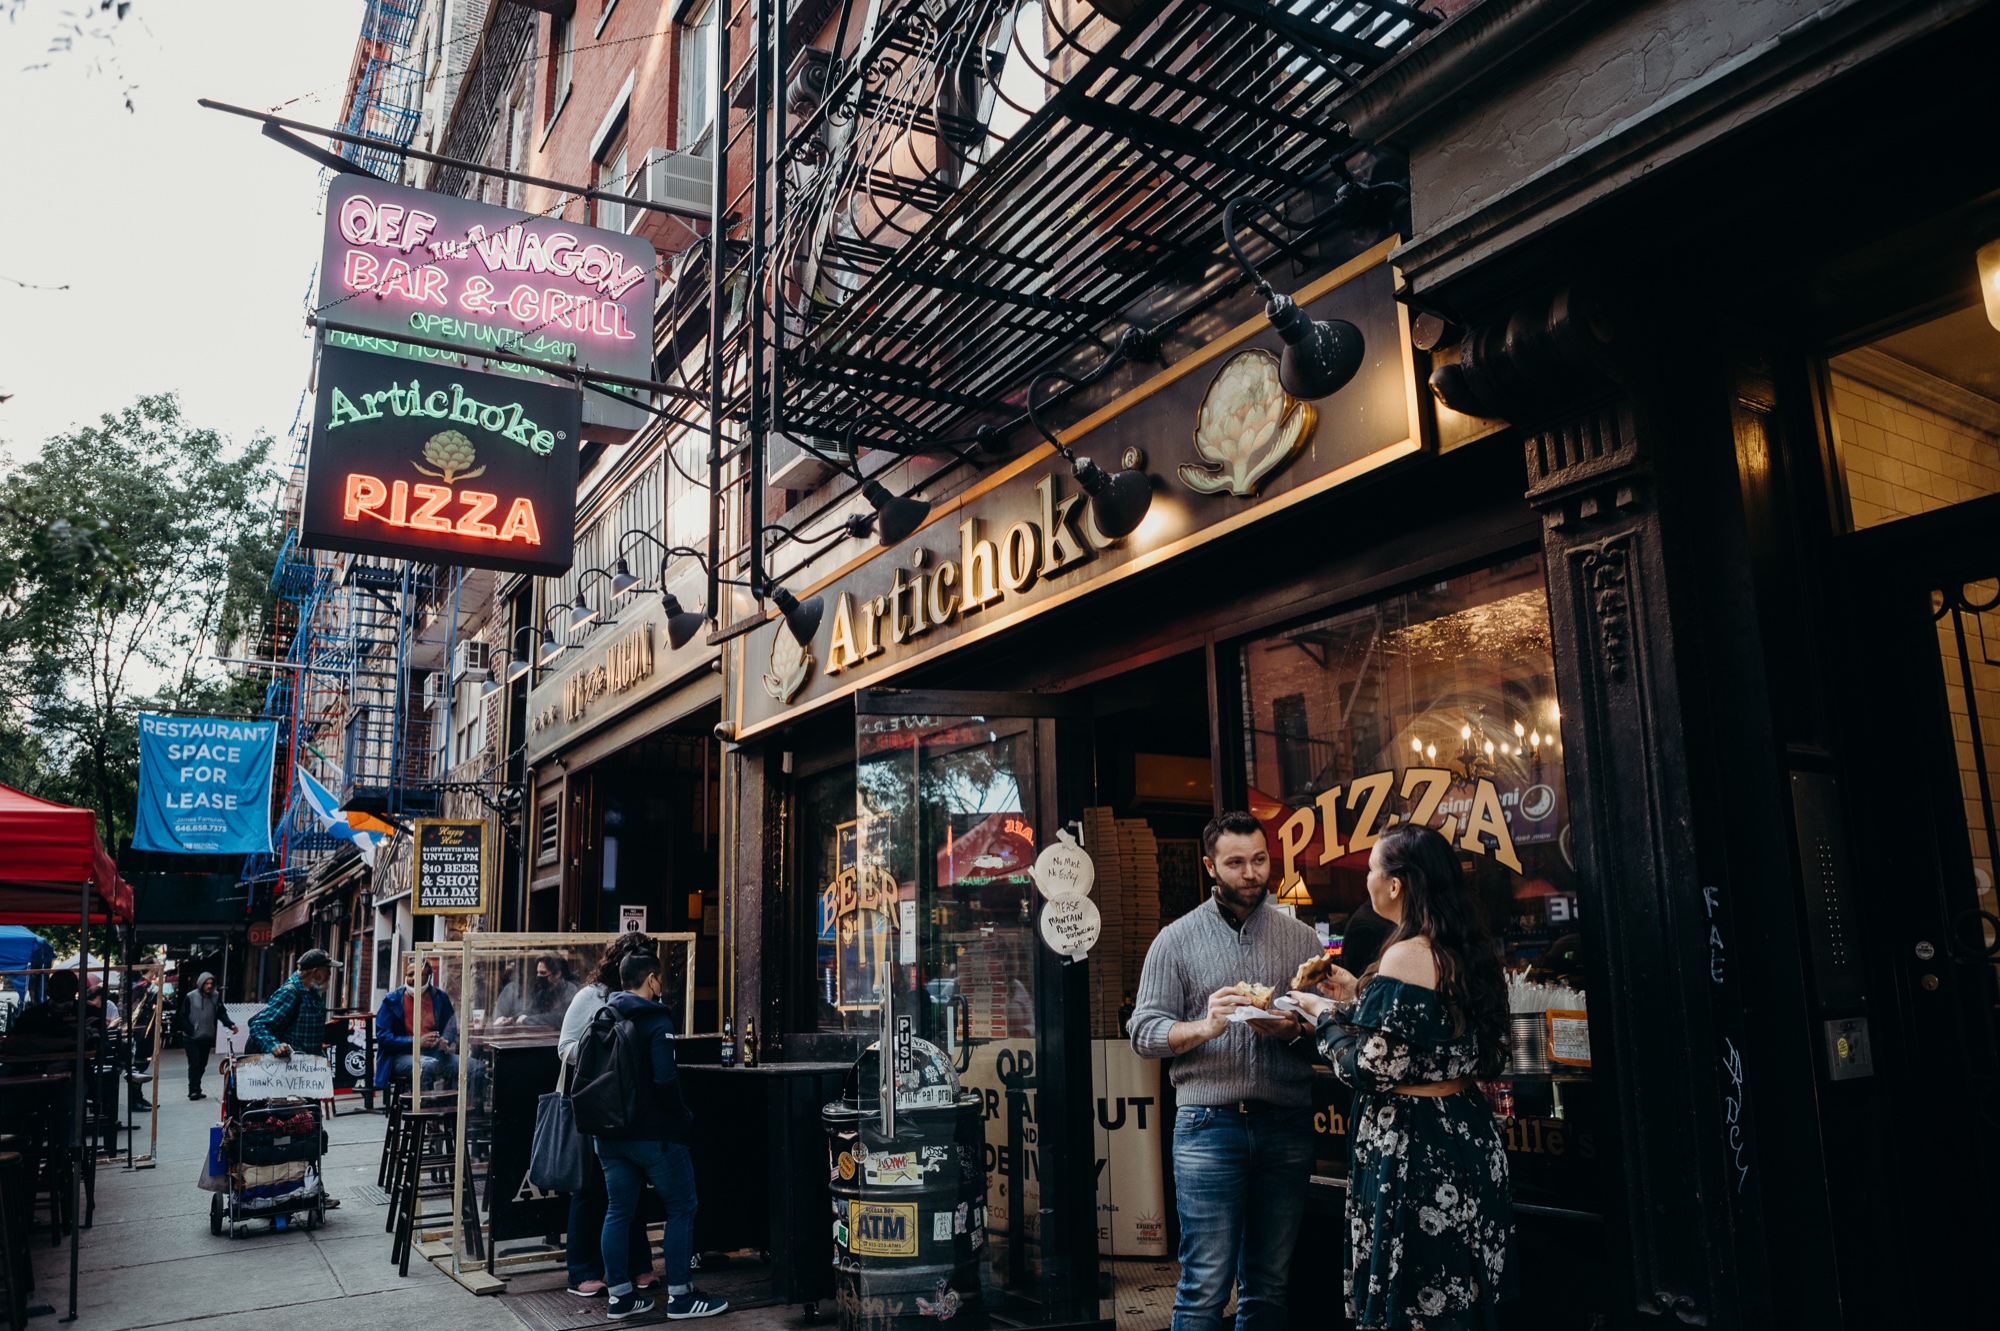 engagement photos of a couple eating pizza at artichoke pizza in the west village, new york city